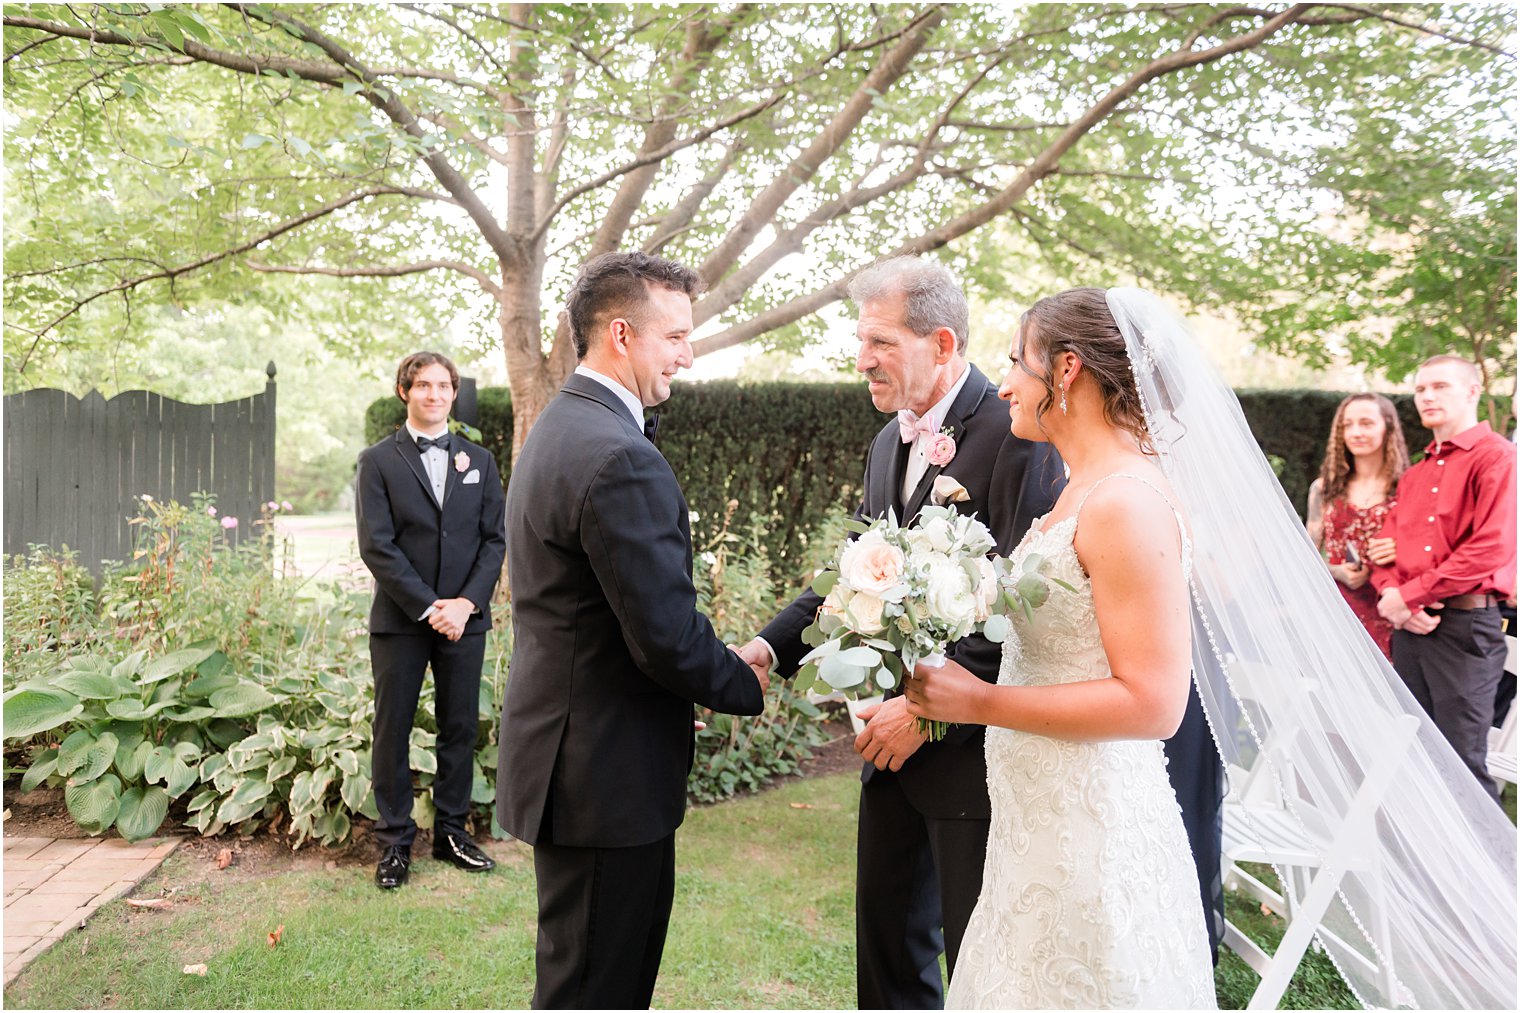 groom shakes hand with father-in-law during wedding ceremony in garden at The Inn at Fernbrook Farms